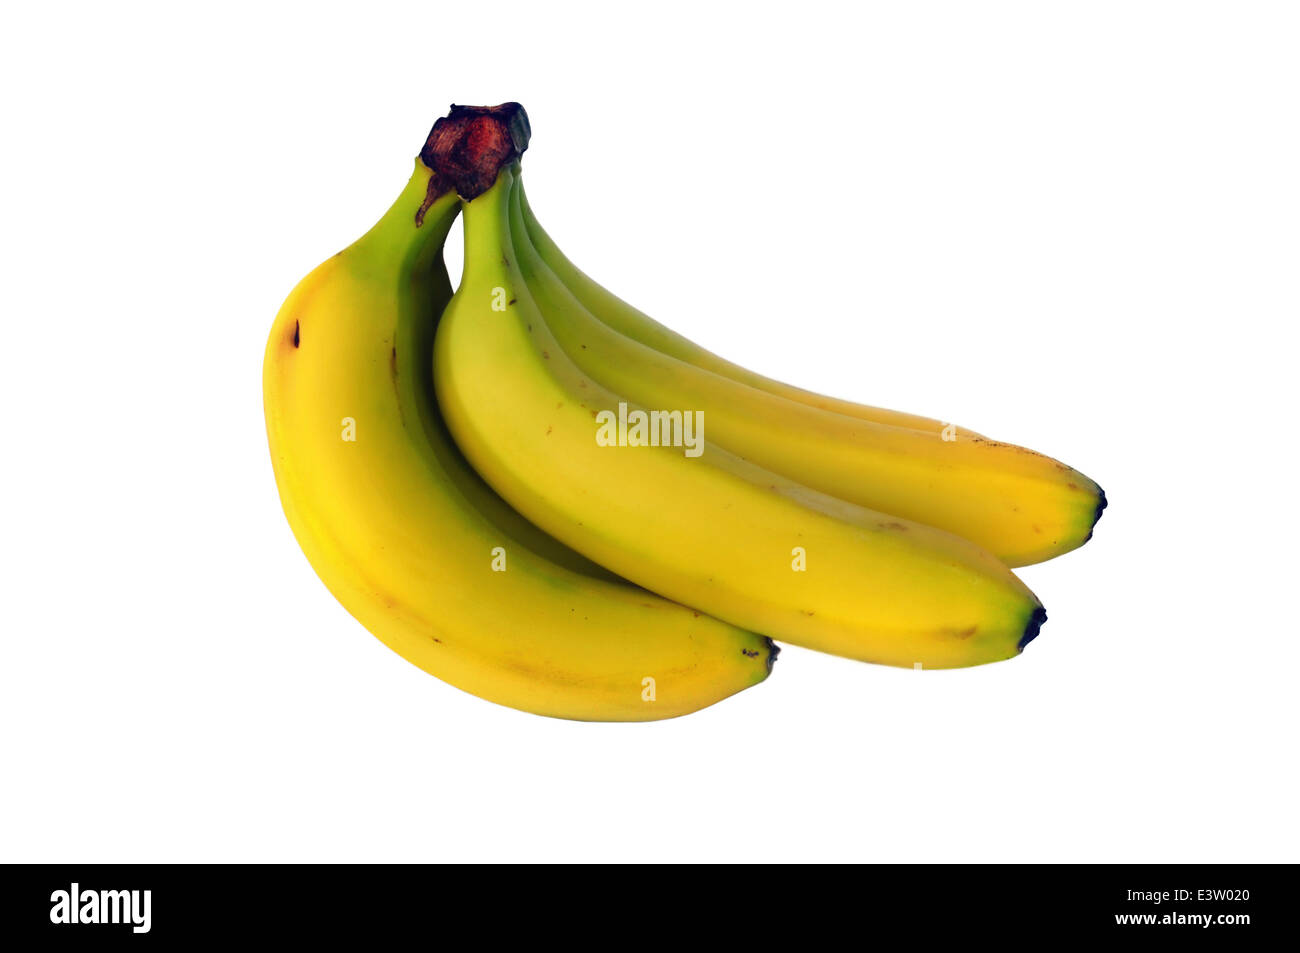 Cluster of ripe bananas. Tropical yellow fruit on white background. Stock Photo